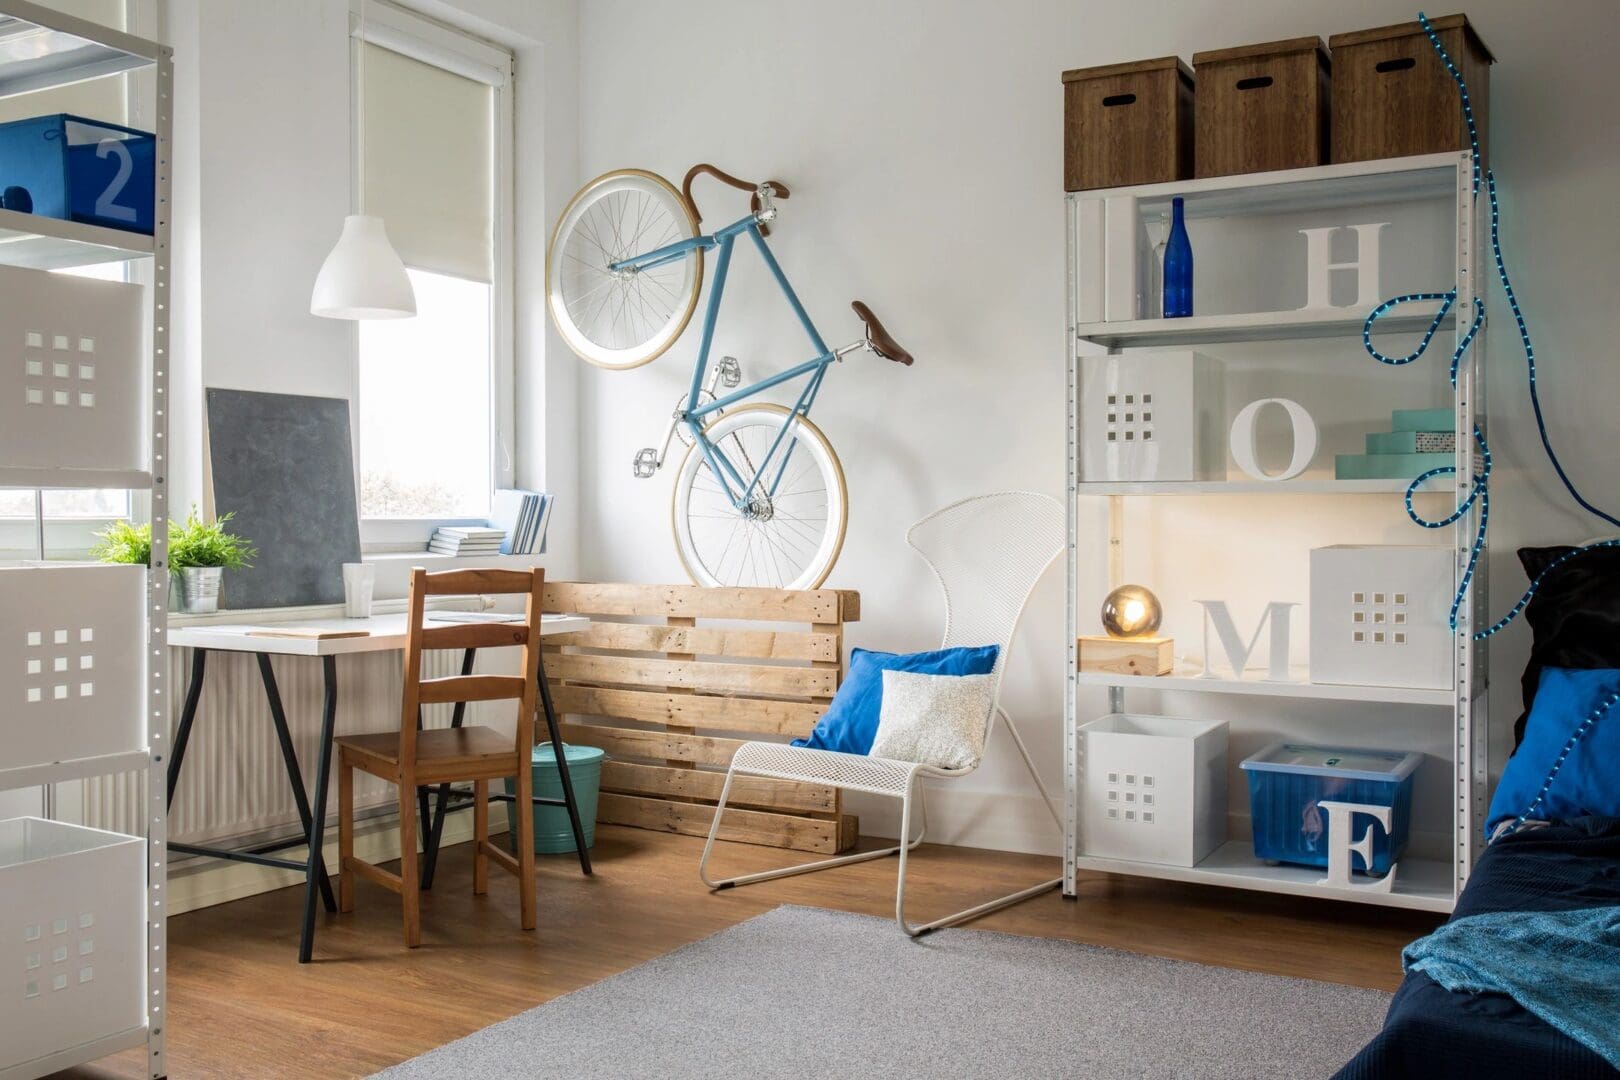 A room with a desk, chair and bicycle on the wall.